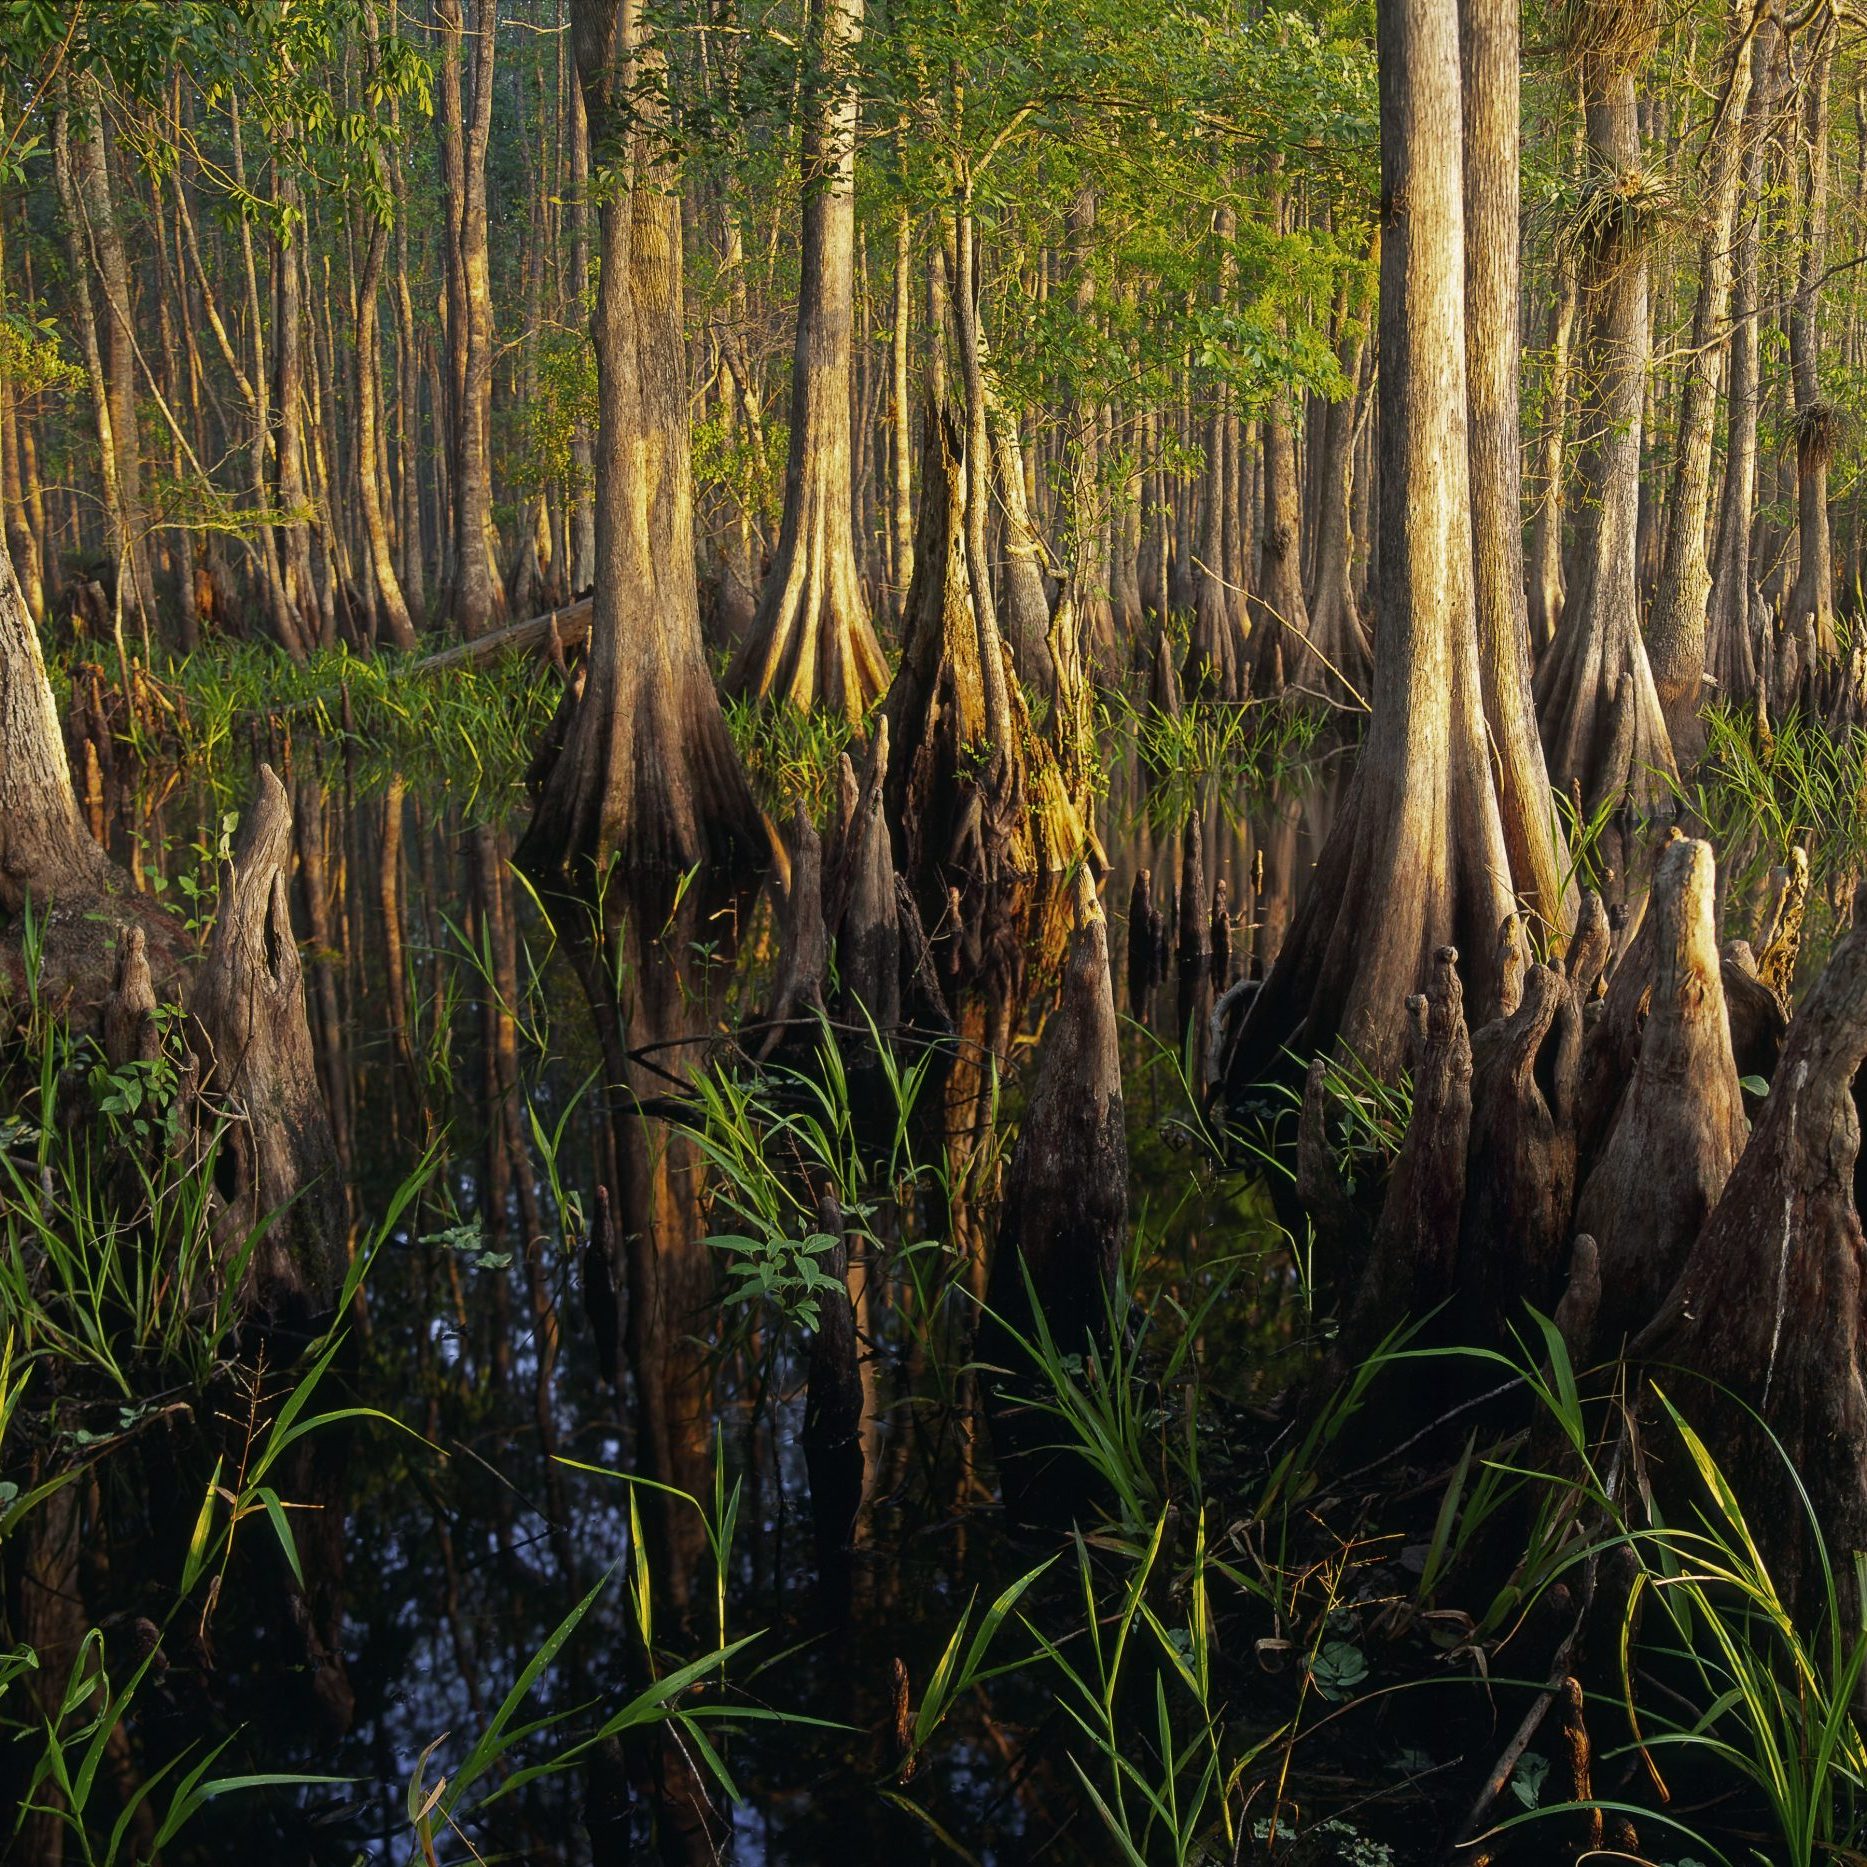 A landscape of a swamp in The Disney Wilderness Preserve